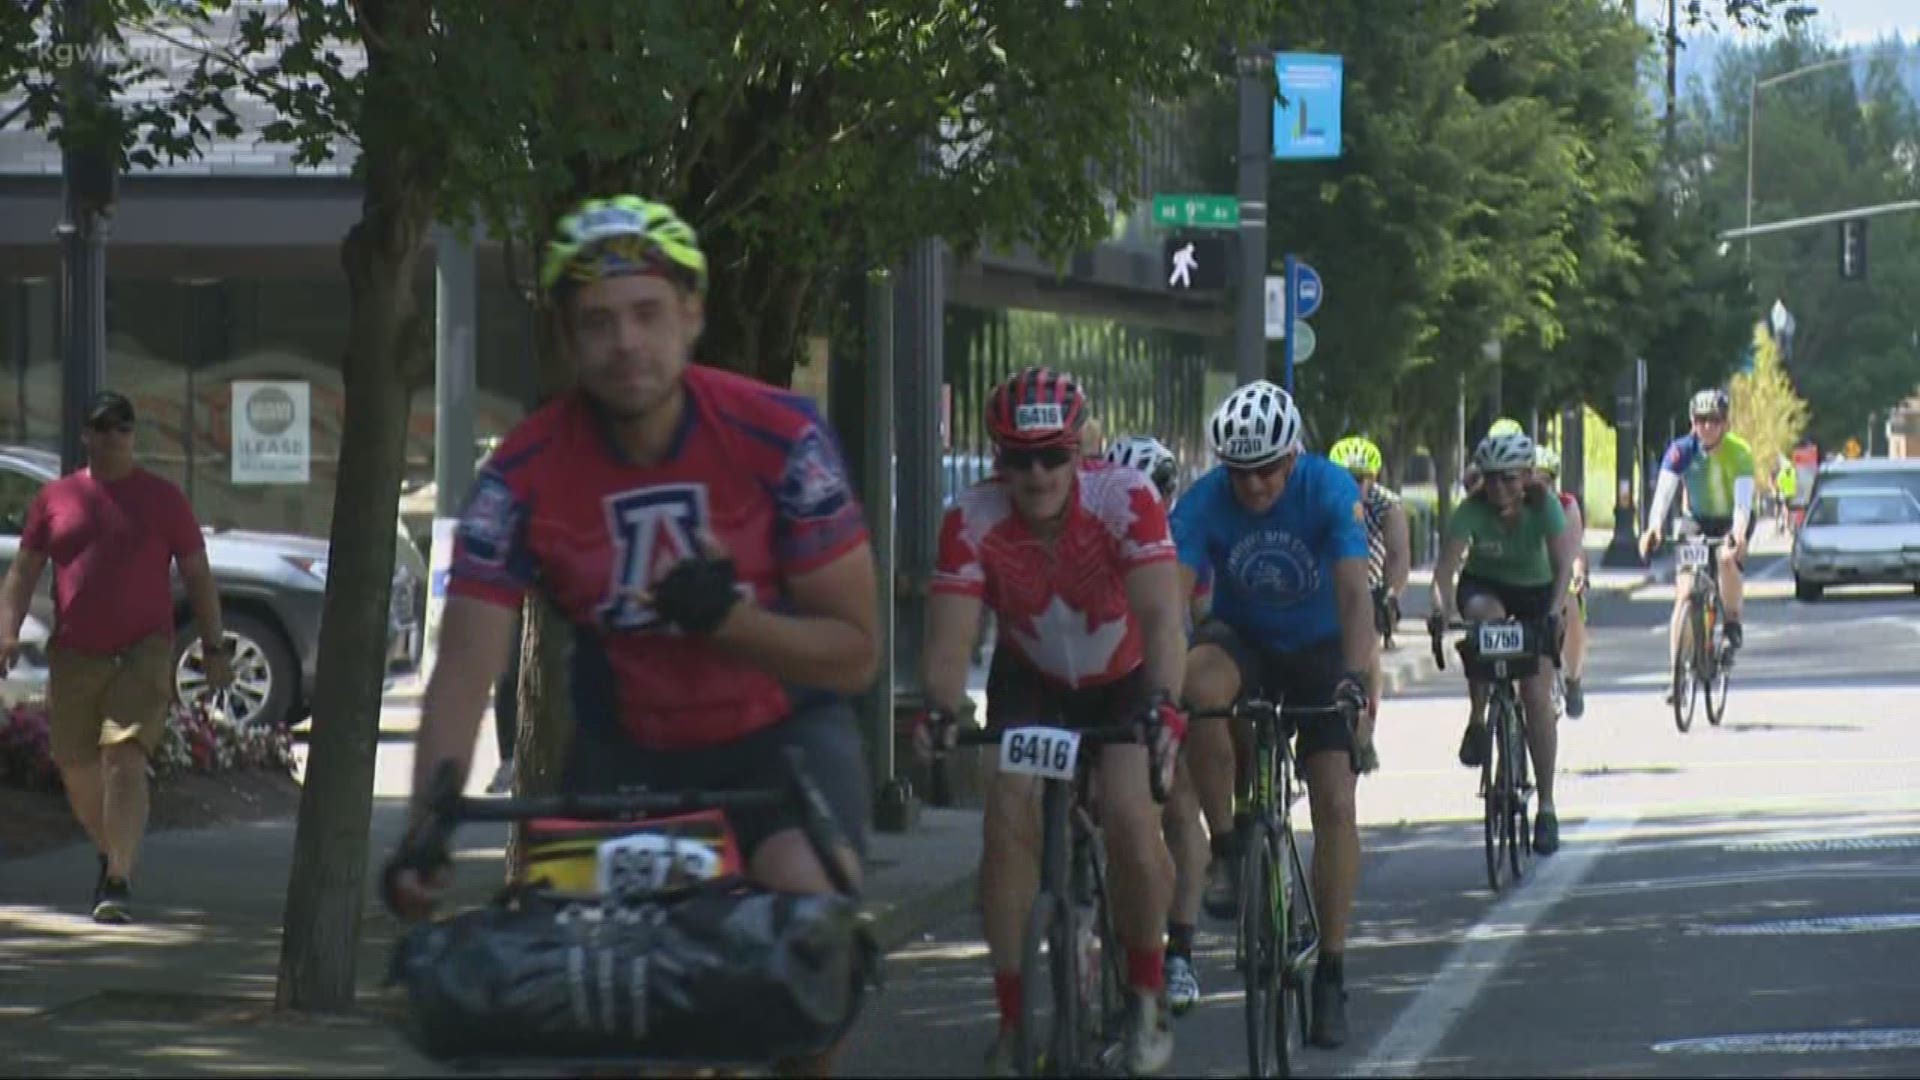 More than 8,000 bicyclists crossed the finish line this weekend after riding all the way from Seattle to Portland